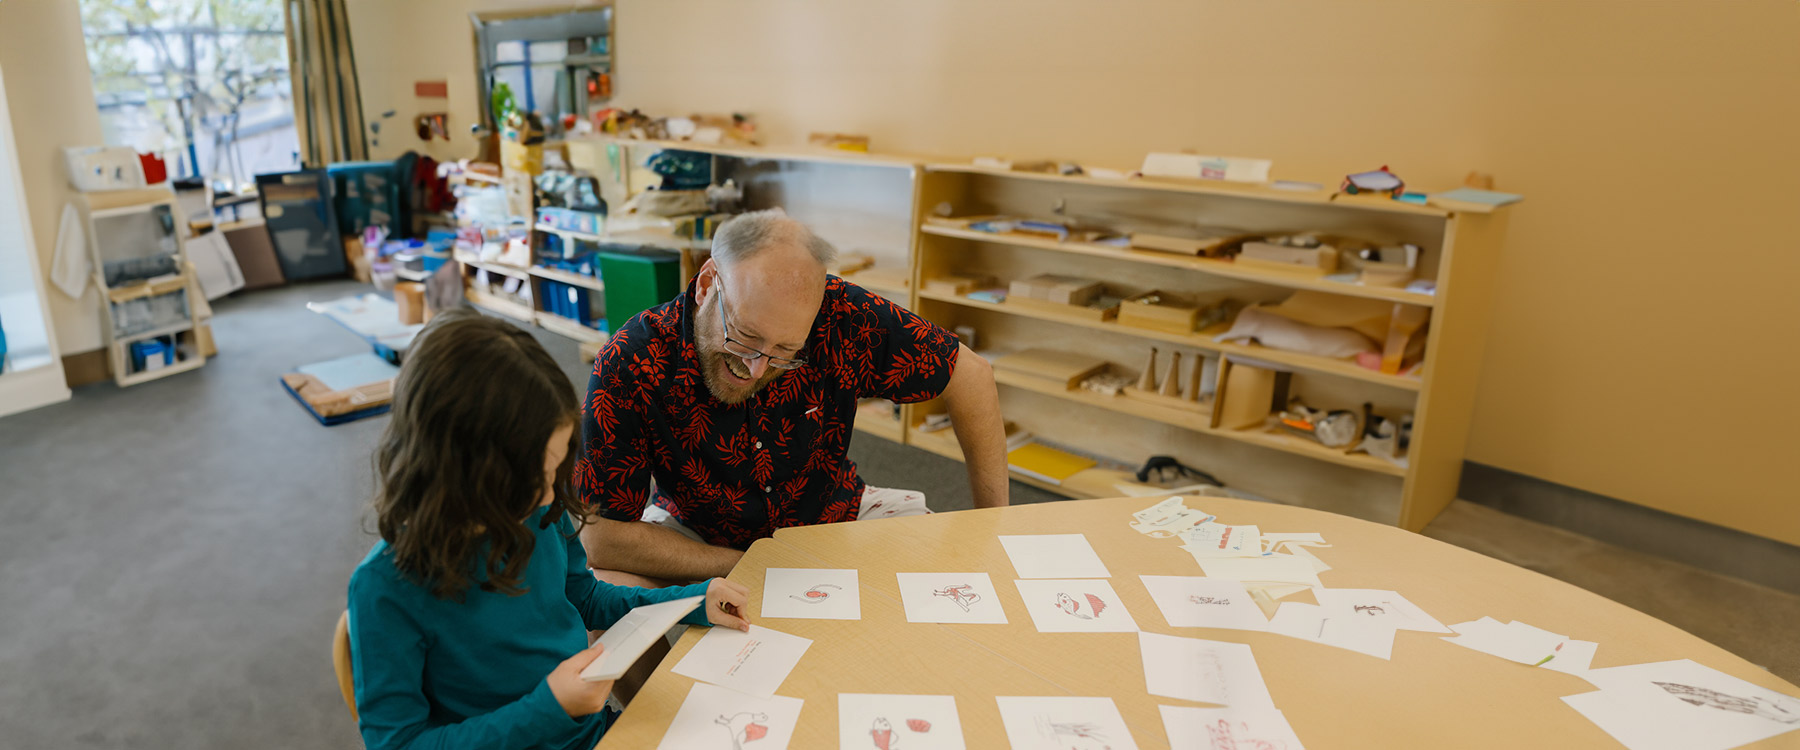 A teacher and a child sit at a table, engaging with drawings and cards, in an elementary classroom.